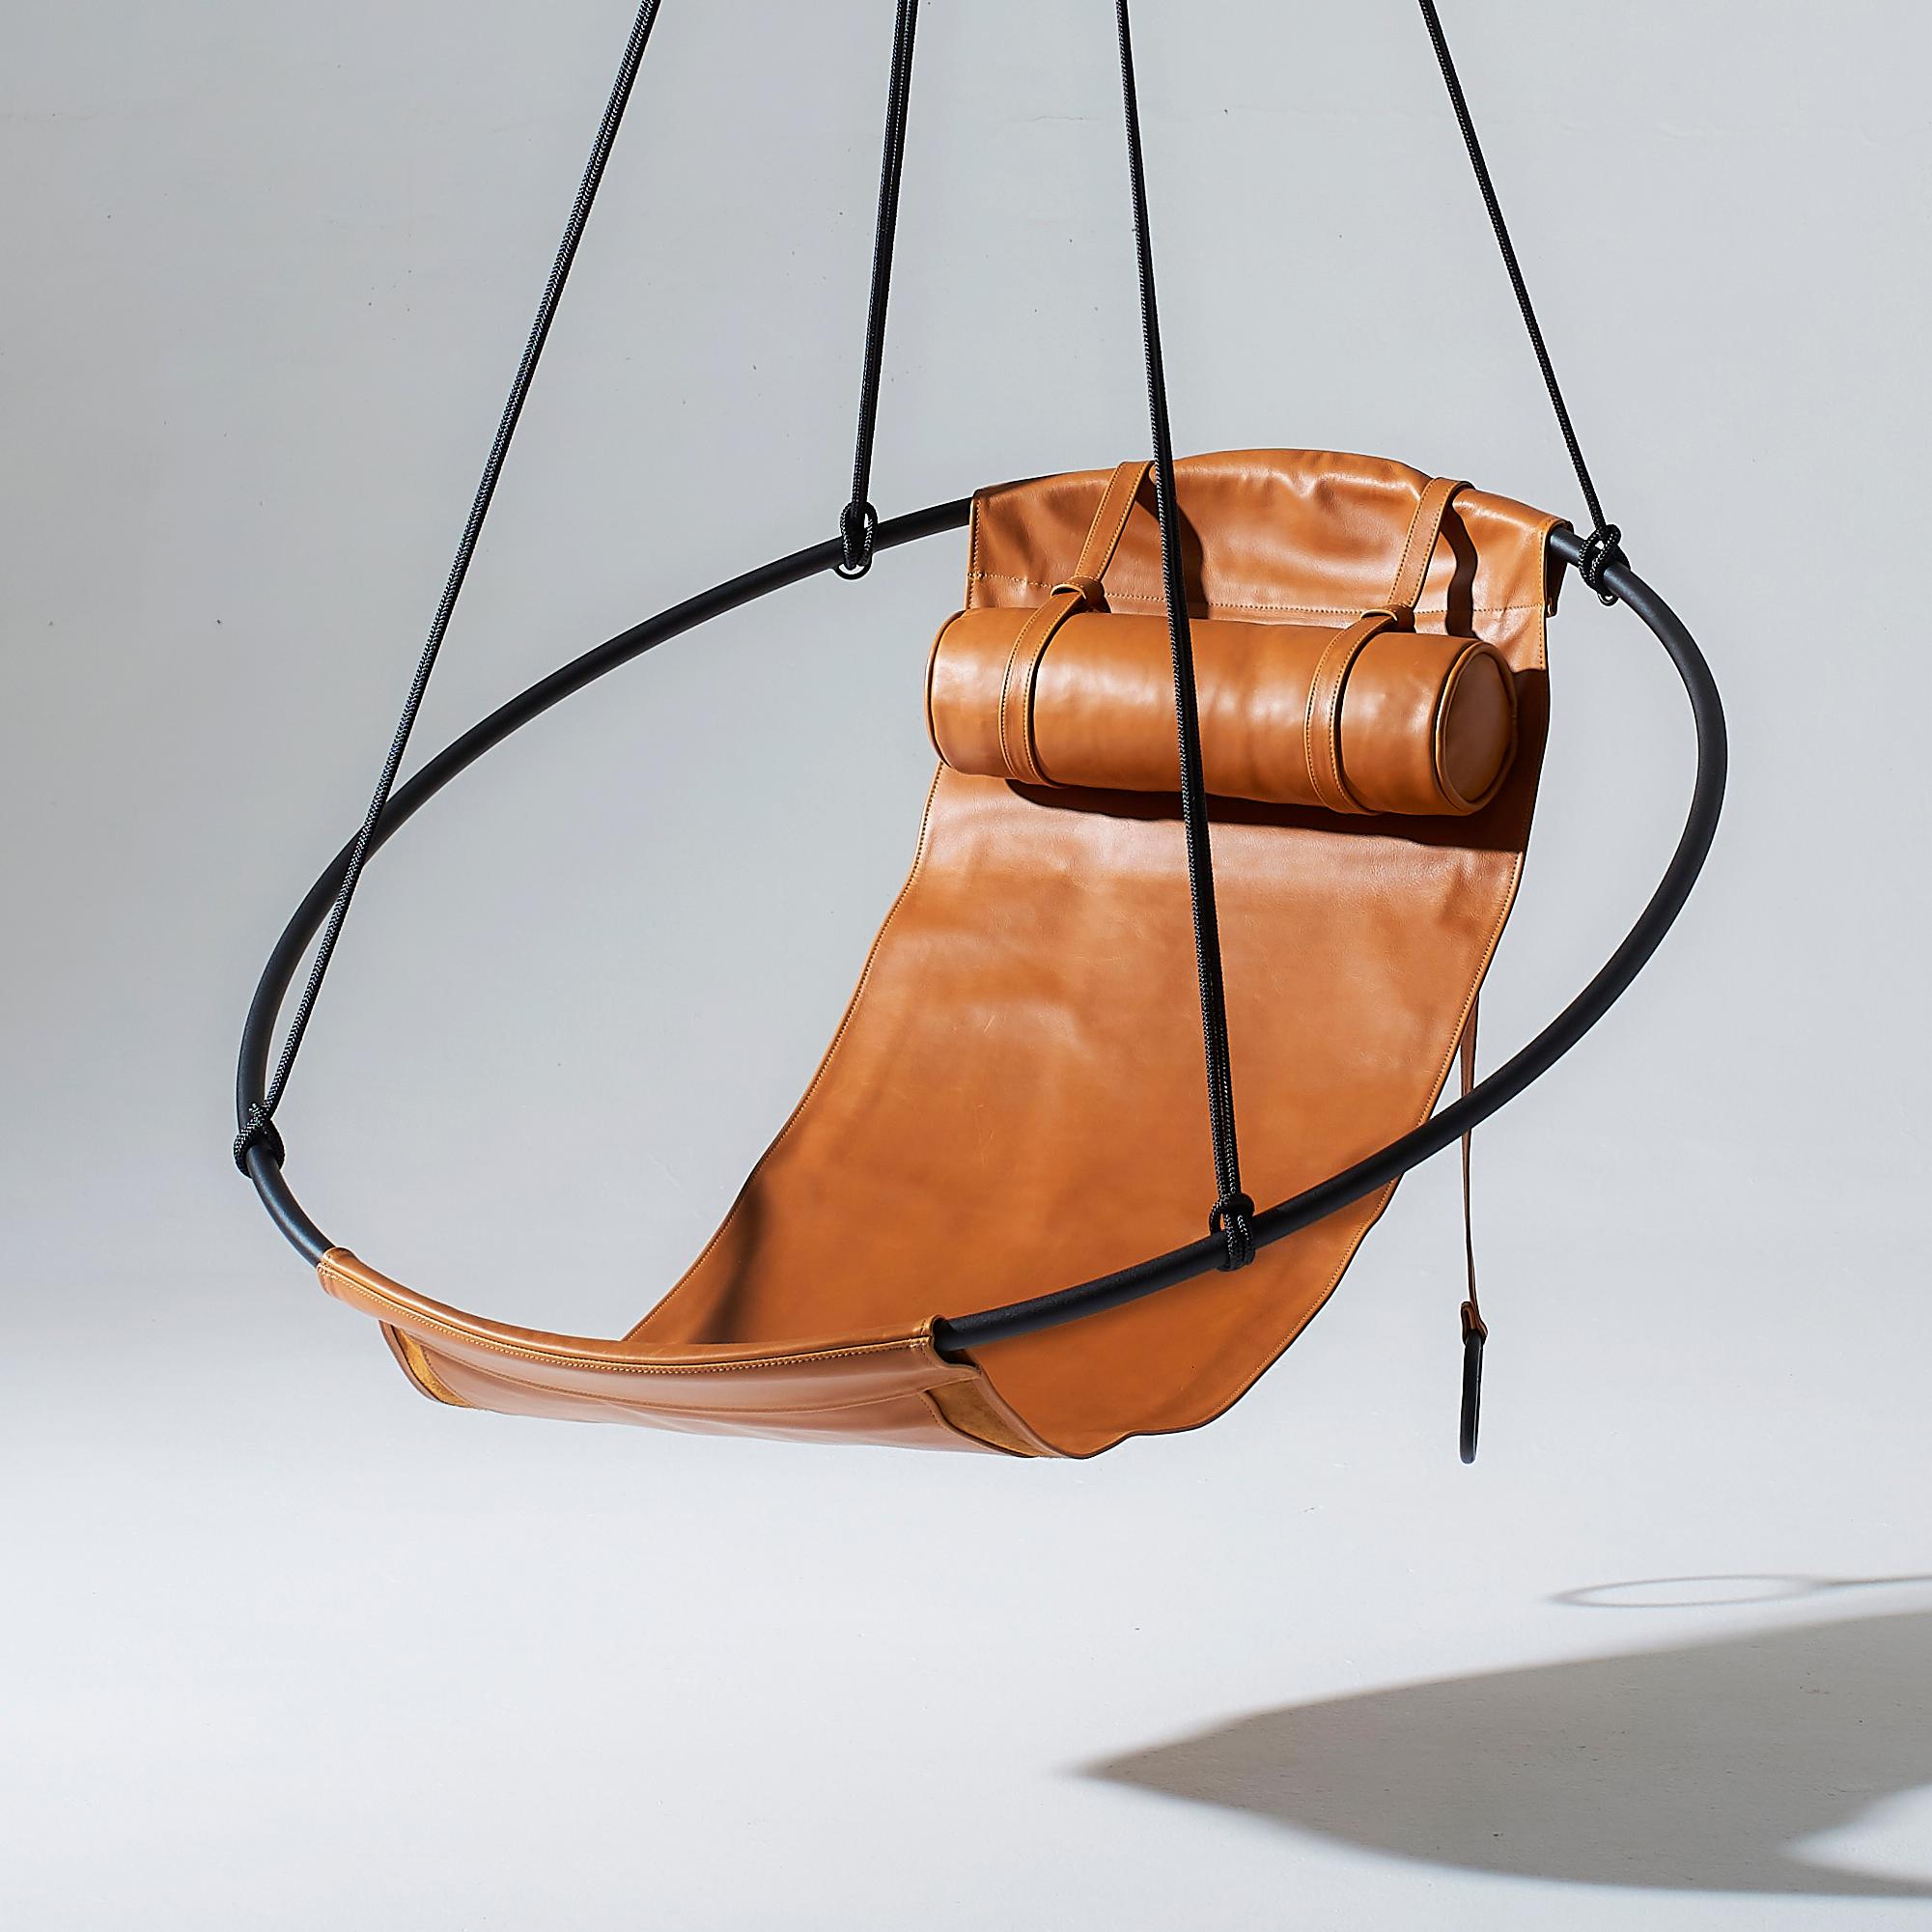 Stripped away from all excess, this hanging chair has a circular frame with the seat made of leather hanging loose within it, to create a sleek, sexy, and oh so comfortable experience. This chair’s clean lines and lightness makes it a perfect fit